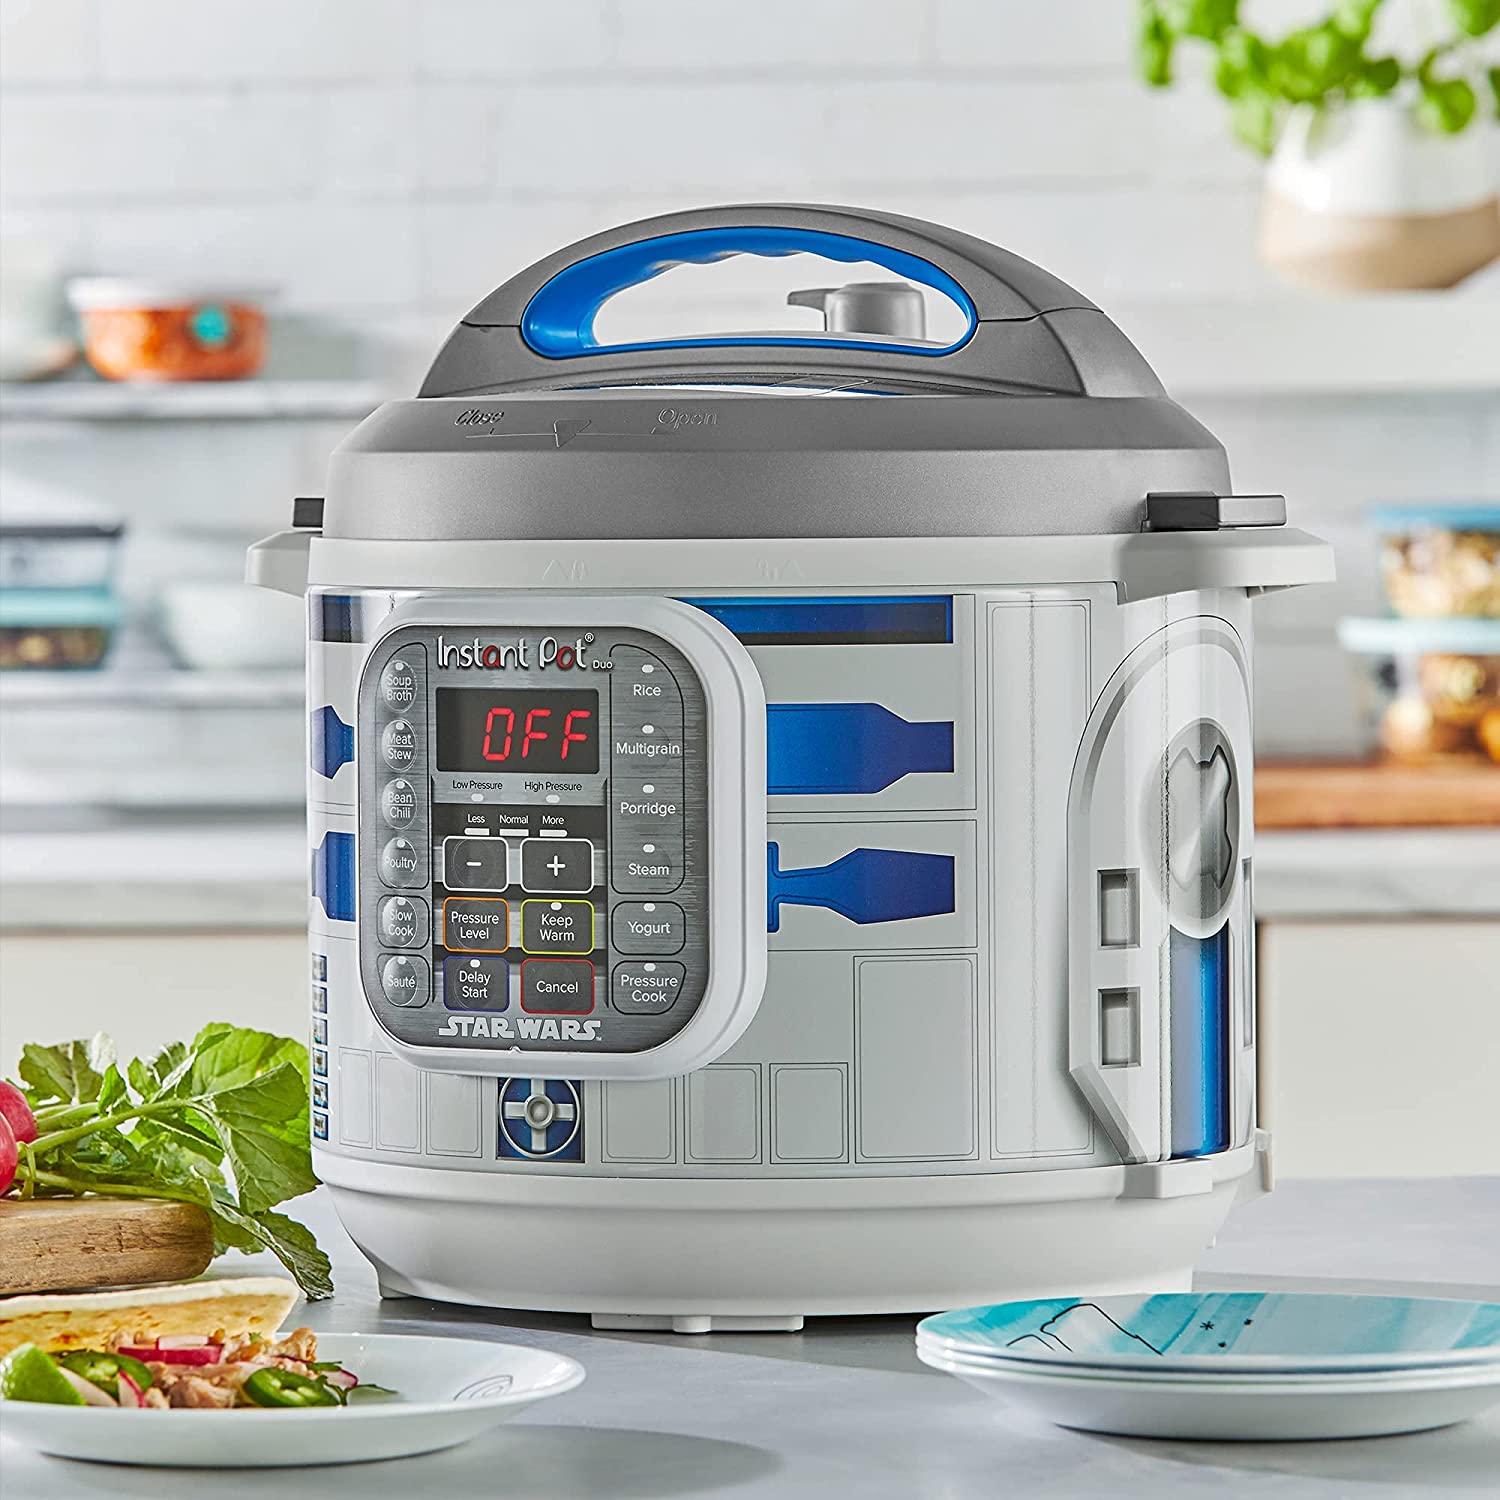 Buy Instant Pot Electric Pressure Cooker Star Wars Limited Model R2D2 Instant  Pot Duo 60 Domestic Official Import Product from Japan - Buy authentic Plus  exclusive items from Japan